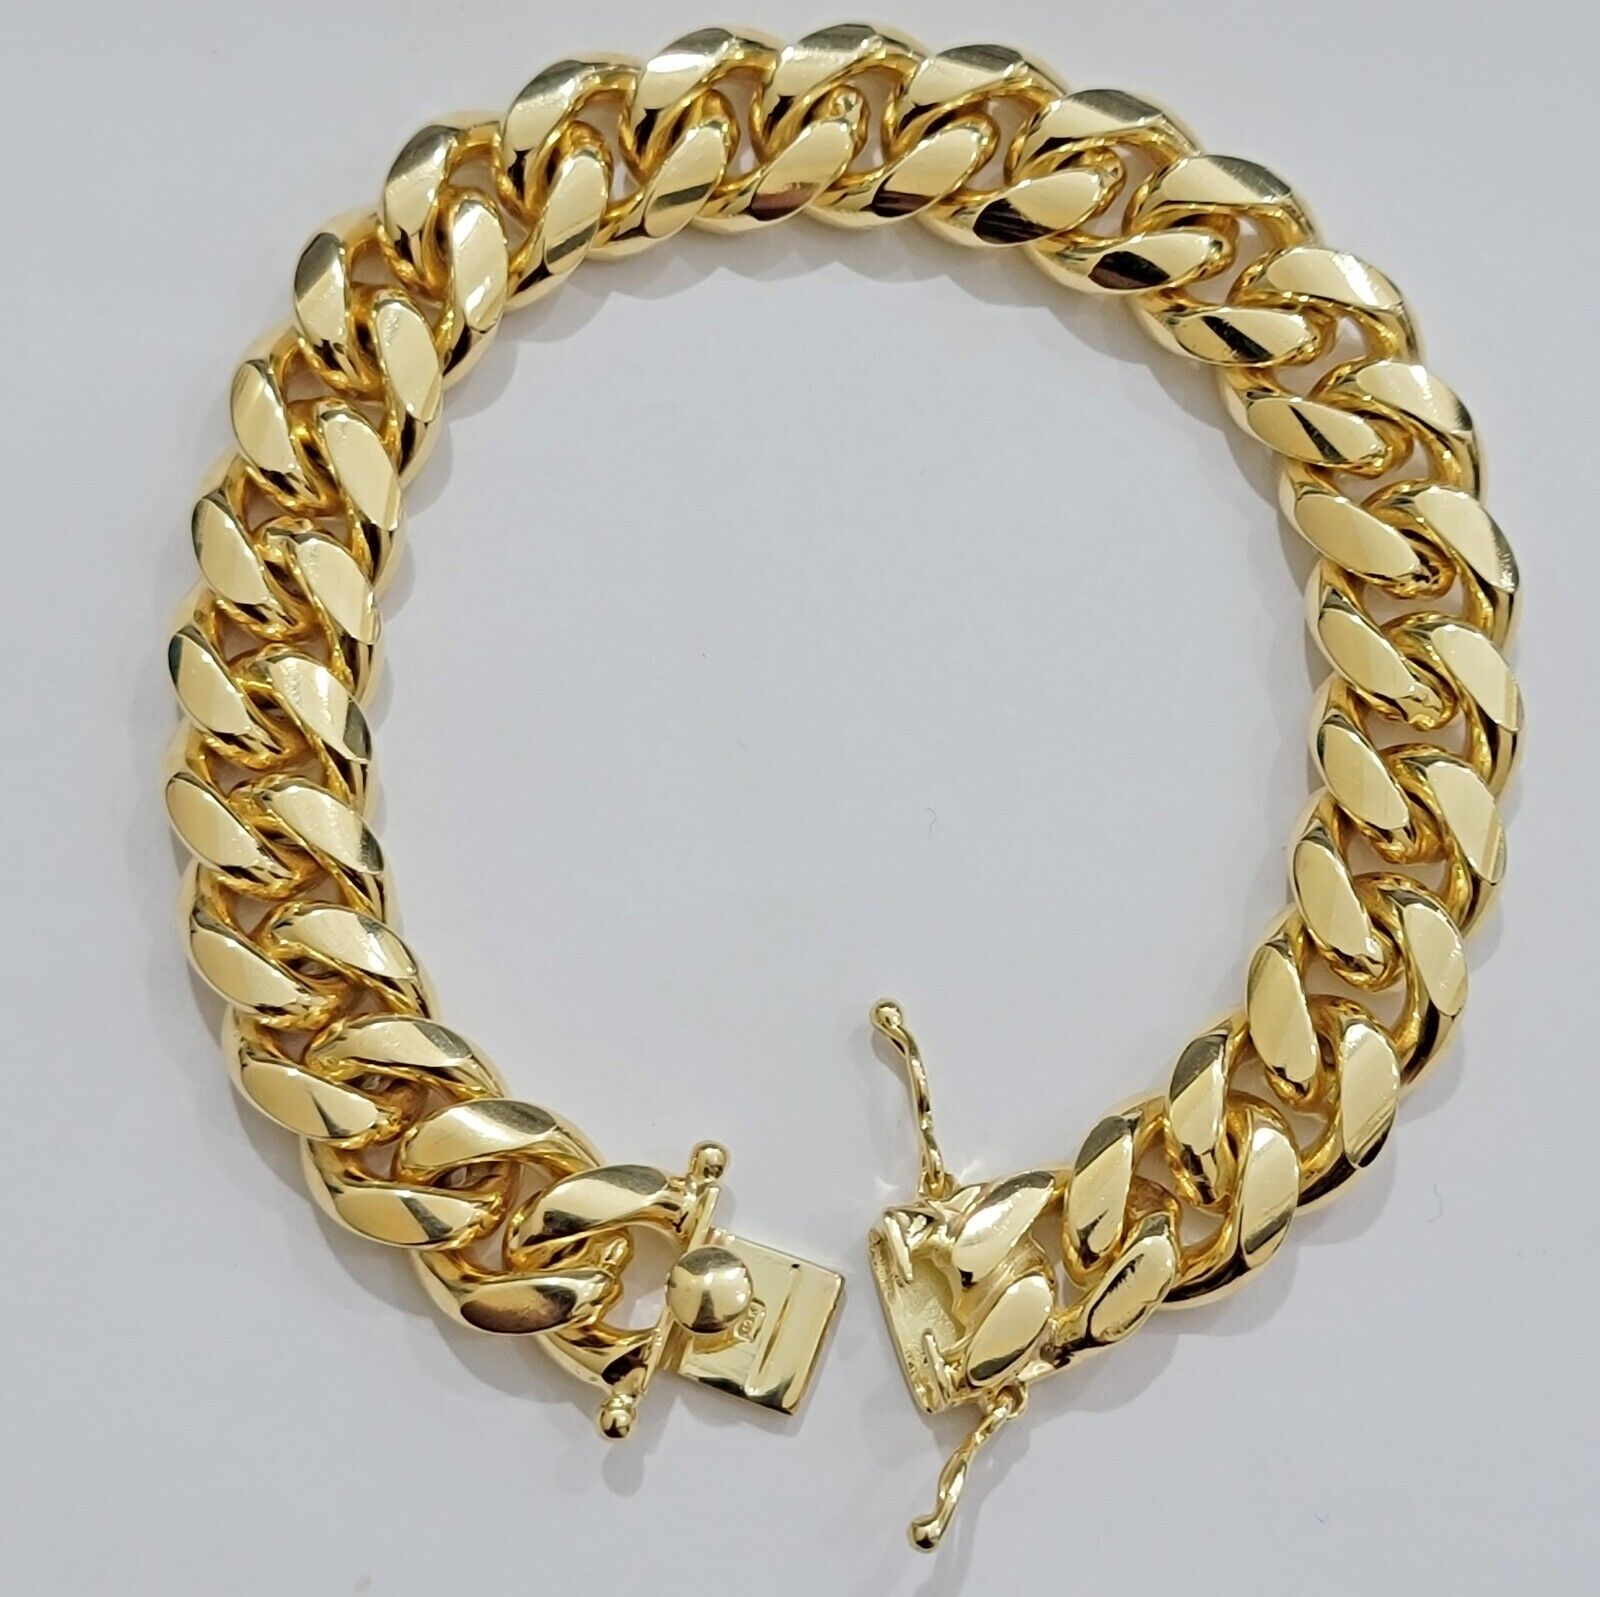 Solid 10k Gold Bracelet Miami Cuban Link 12mm 8" Inch Box Clasp SOLID LINK, Mens